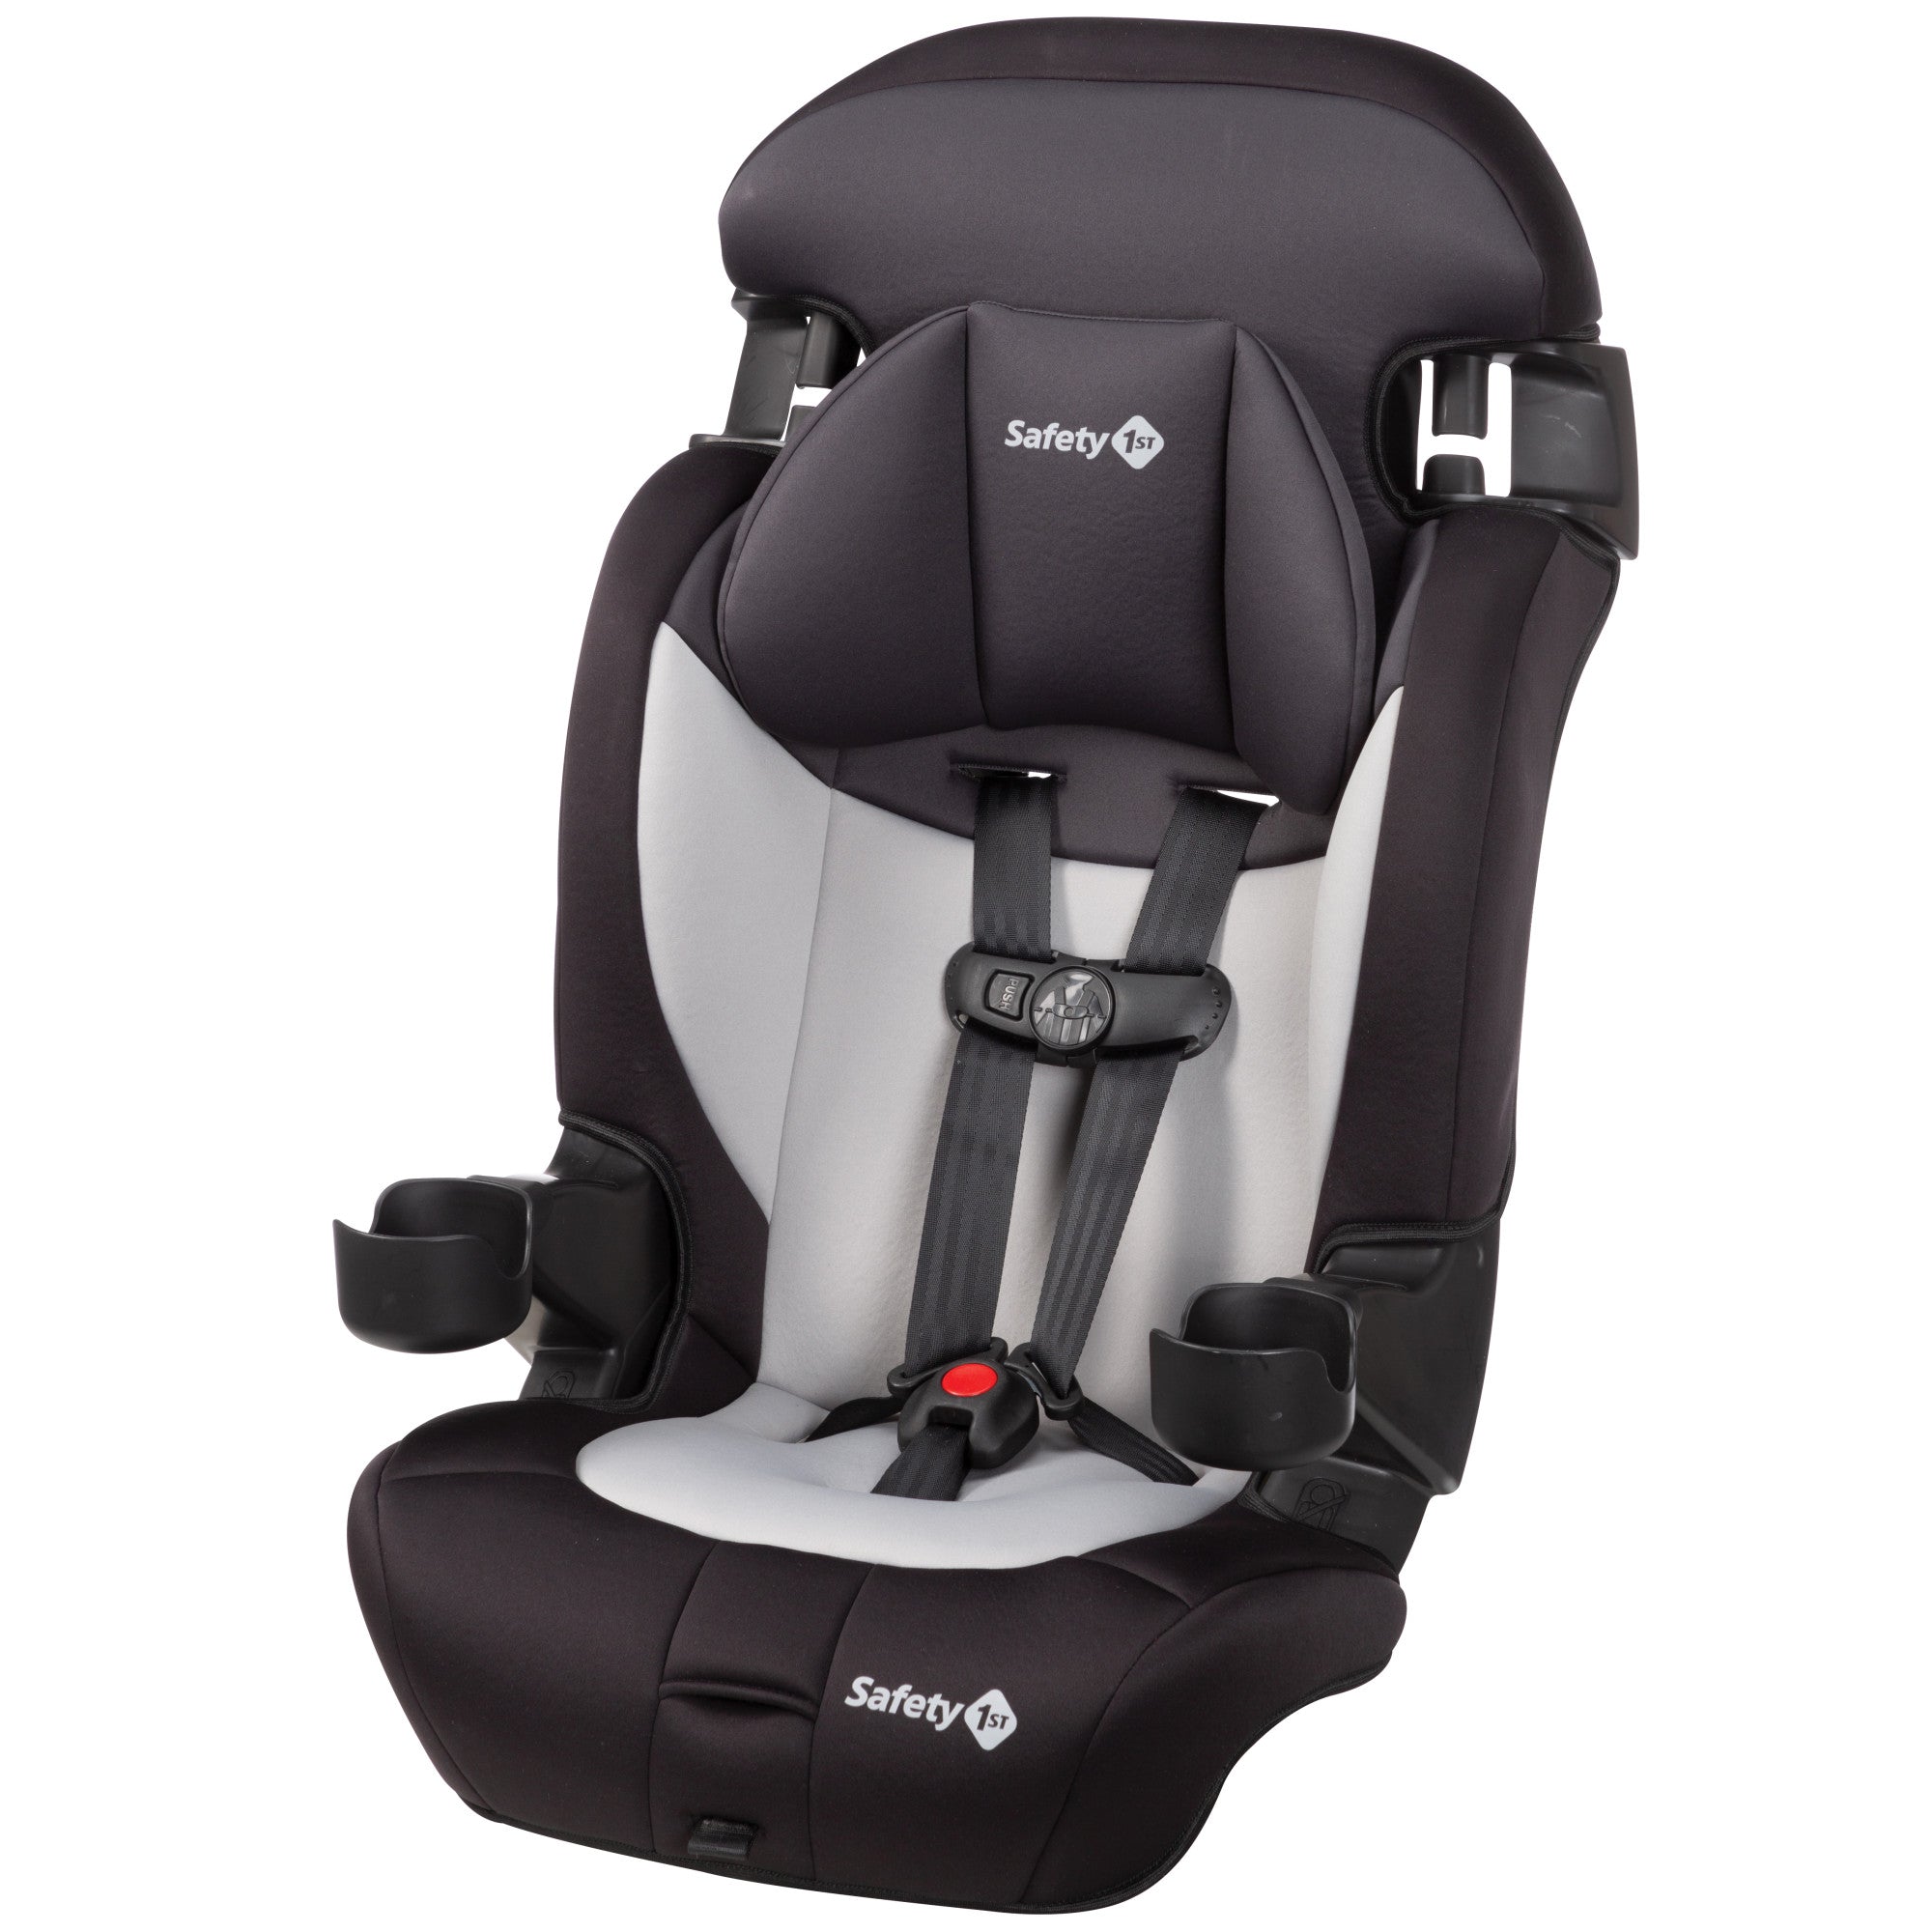 Grand 2-in-1 Booster Car Seat - Black Sparrow